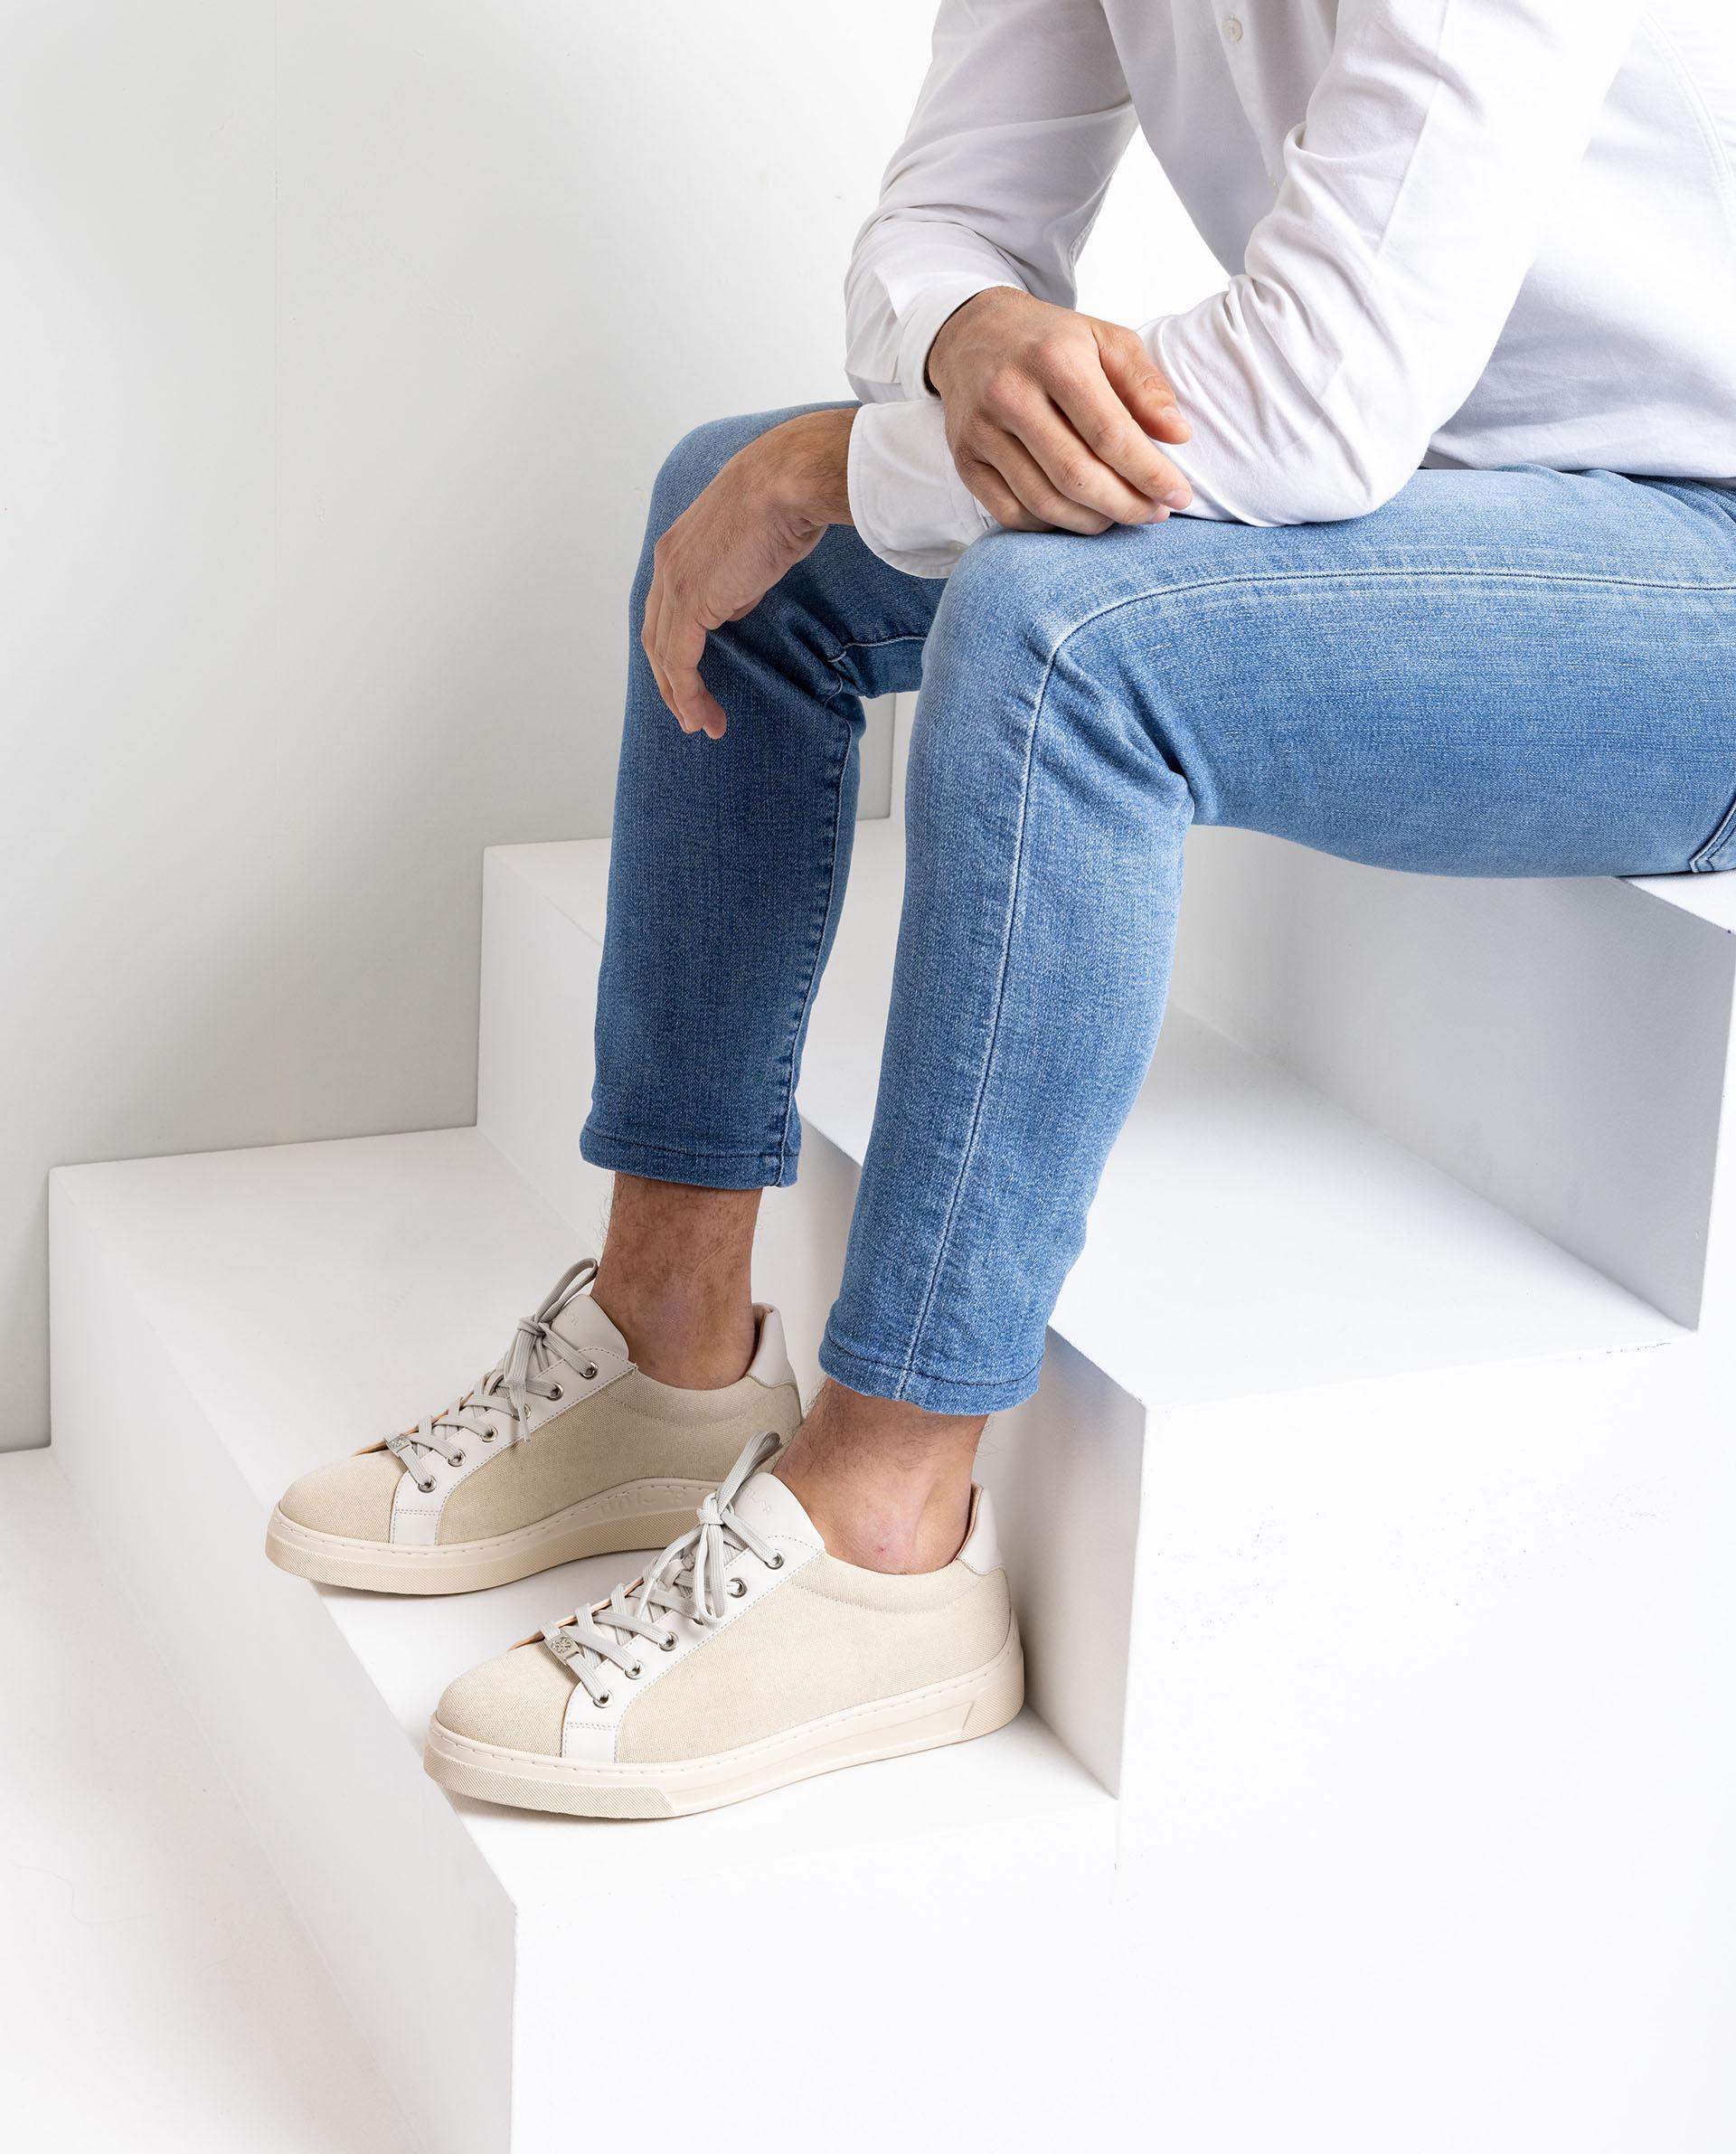 Unisa Sneakers FRANCI_22_ECL_NT ivory